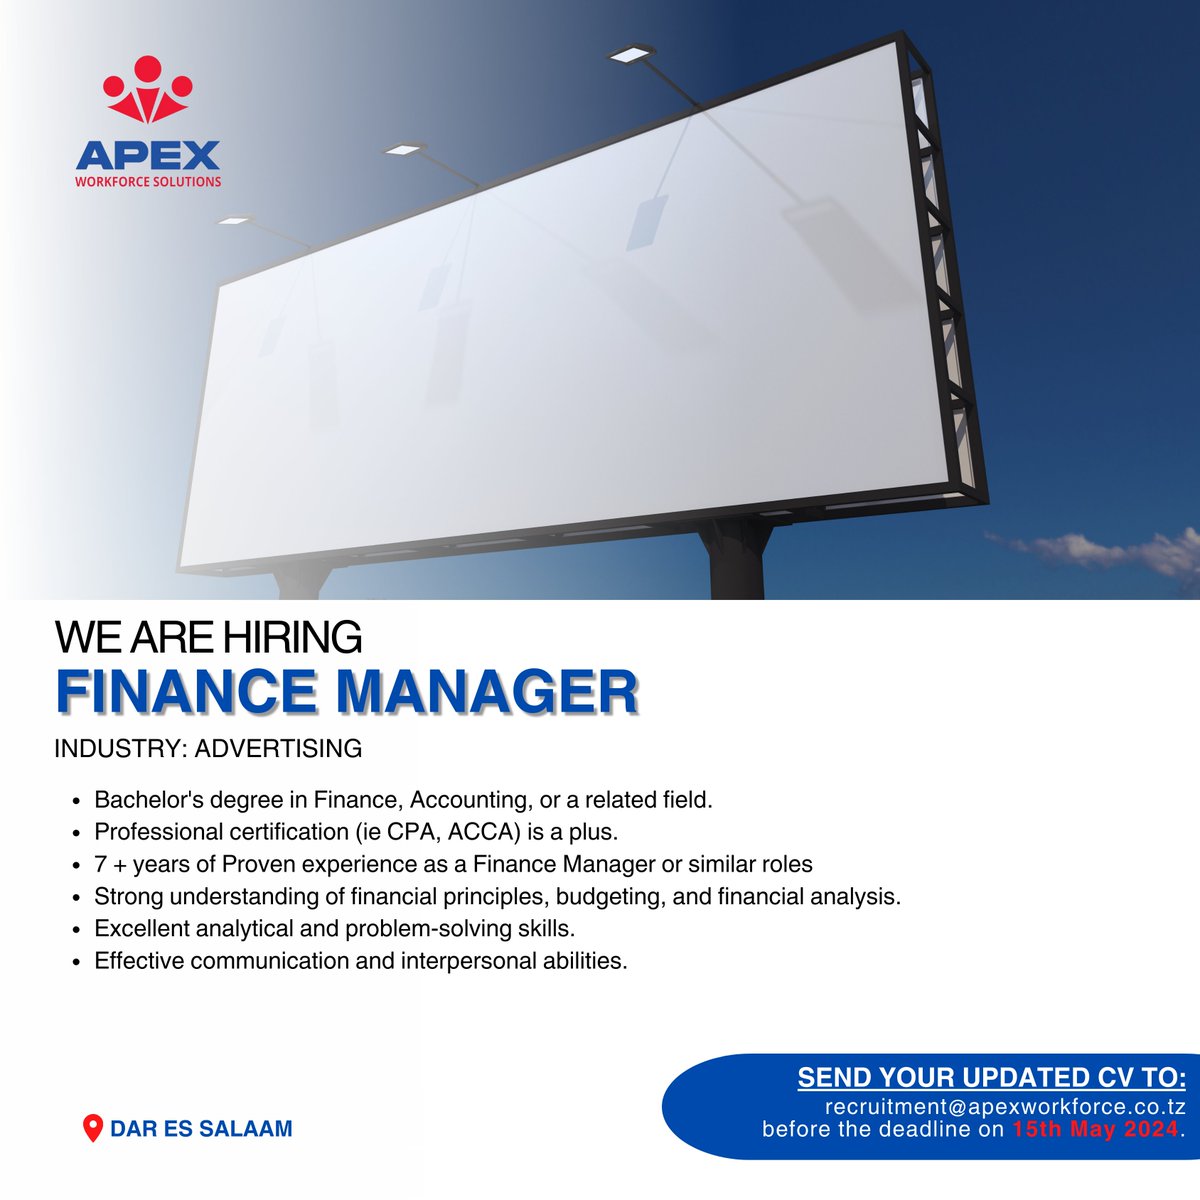 Join our client as they navigate the financial landscape, optimize performance, and drive business growth.  #FinanceManager #AdvertisingIndustry 
Apply now through, recruitment@apexworkforce.co.tz
Deadline: May 15, 2024